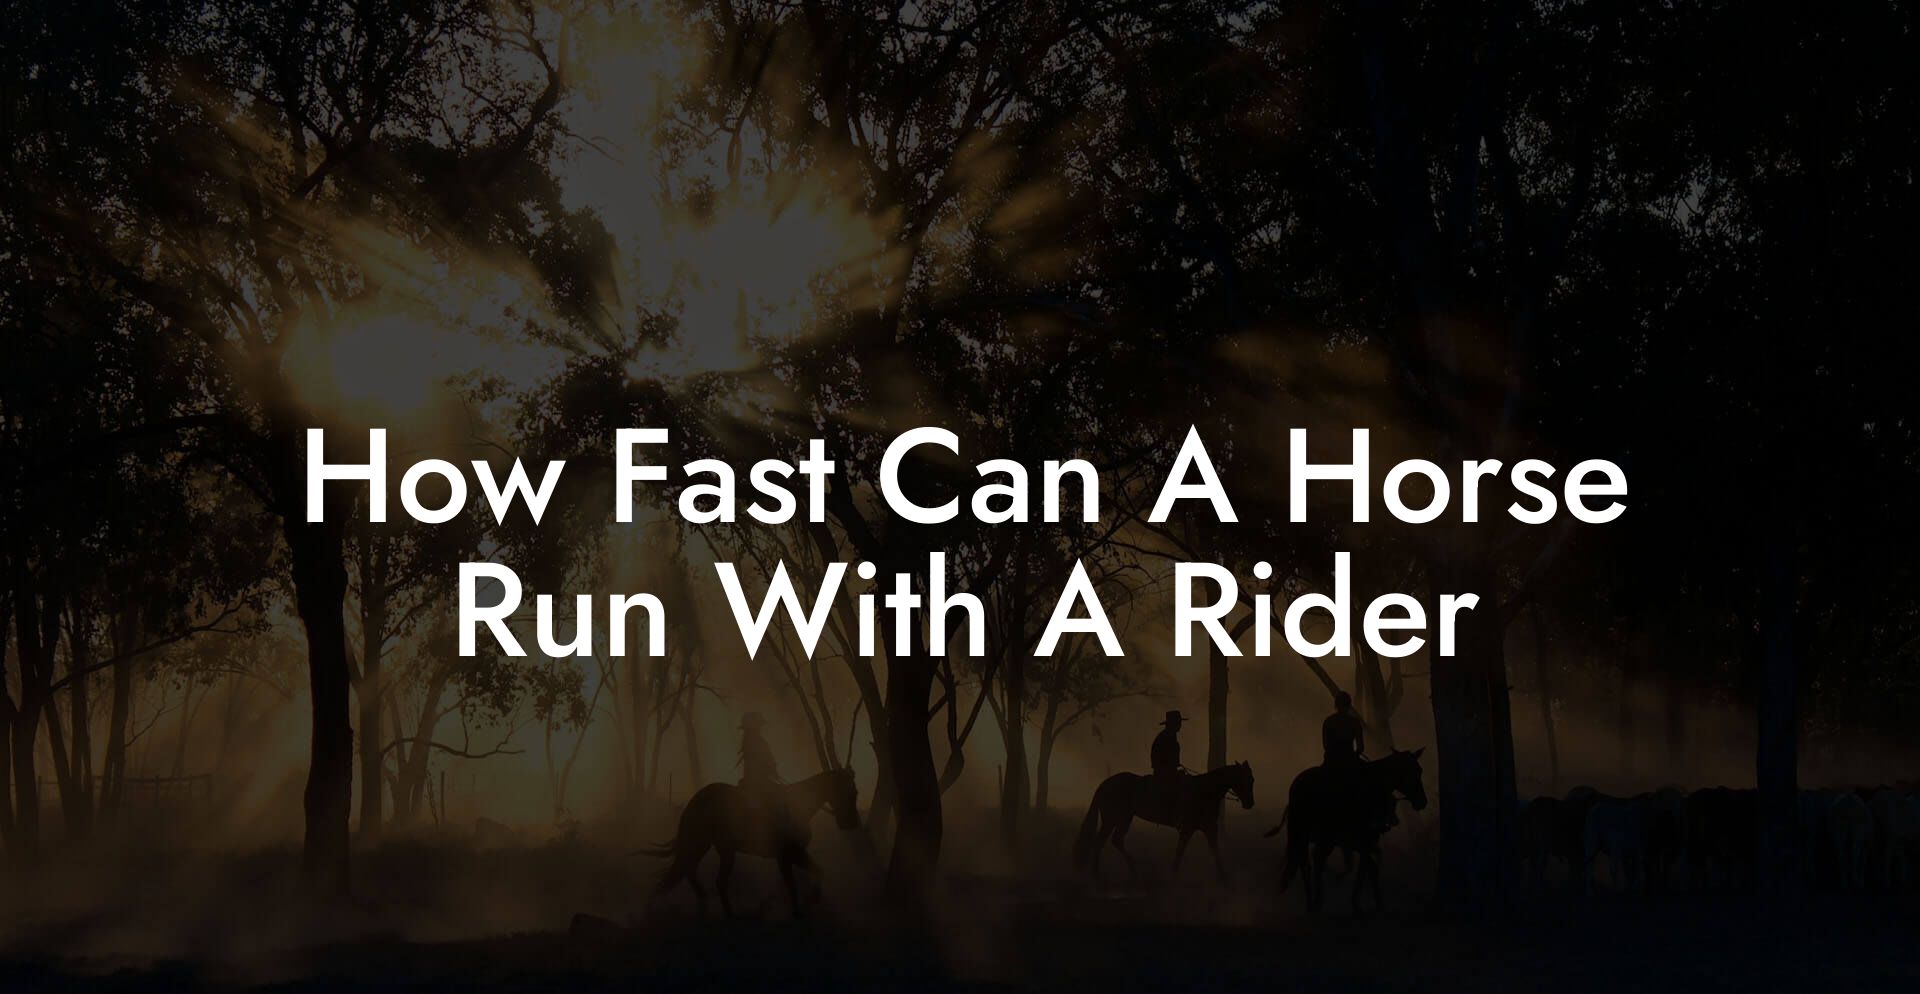 How Fast Can A Horse Run With A Rider